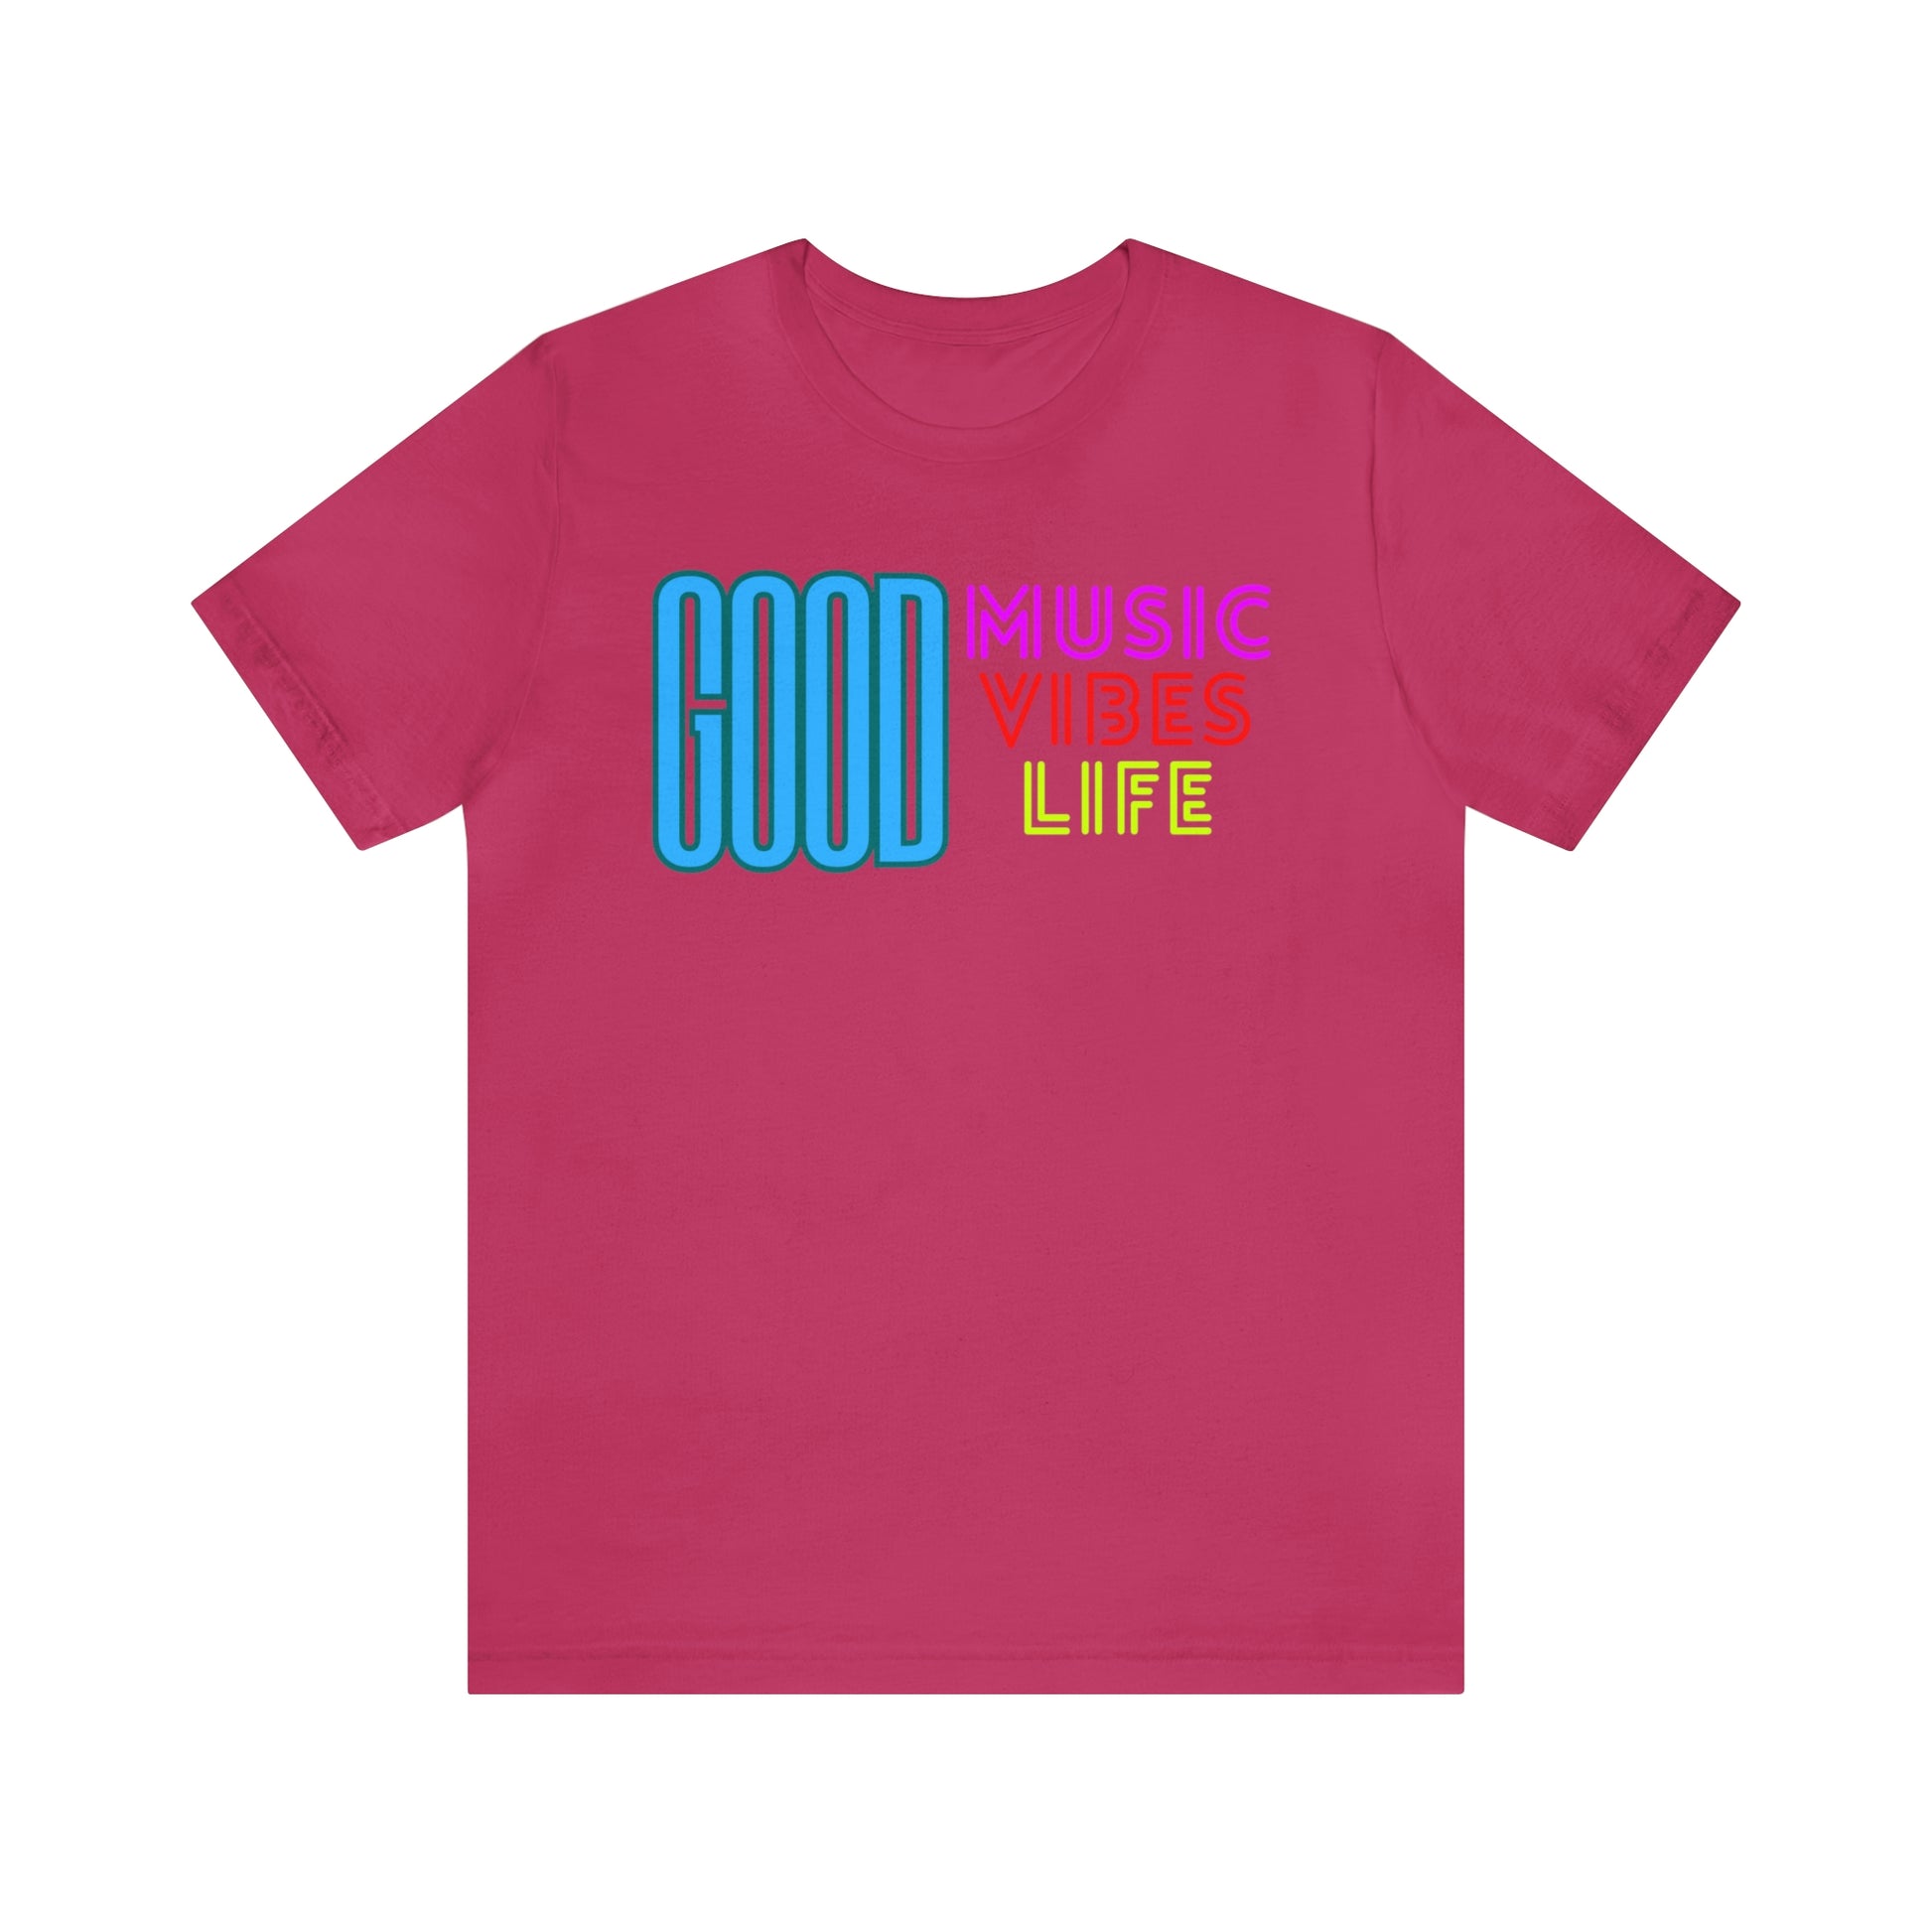 Cool music tshirt with the text "Good music vibes life" in neon colors